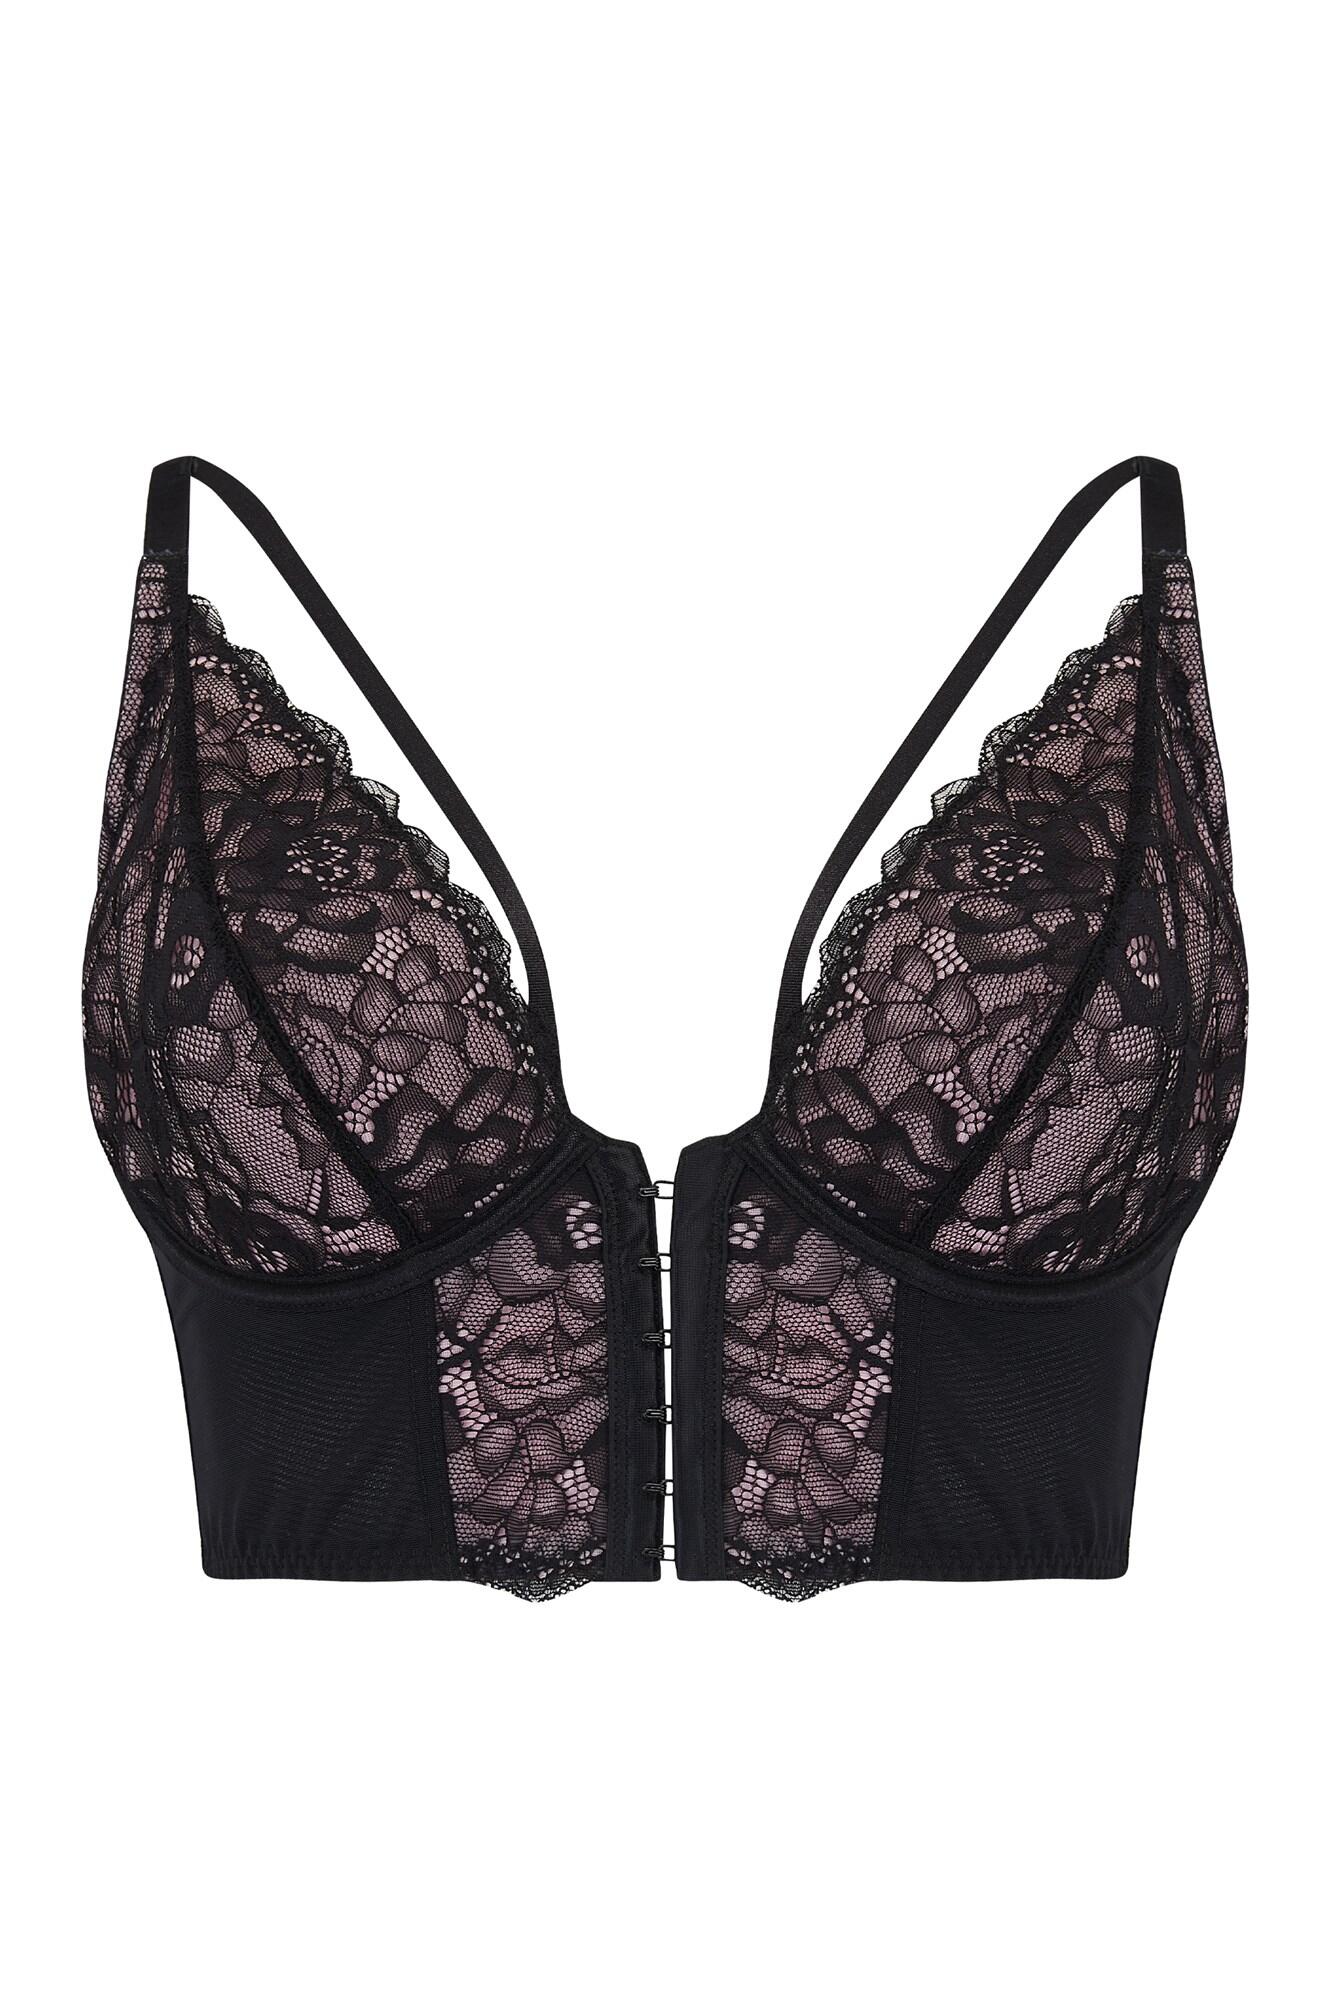 Confession Front Fastening Underwired Bralette in Black/Pink | Pour Moi ...